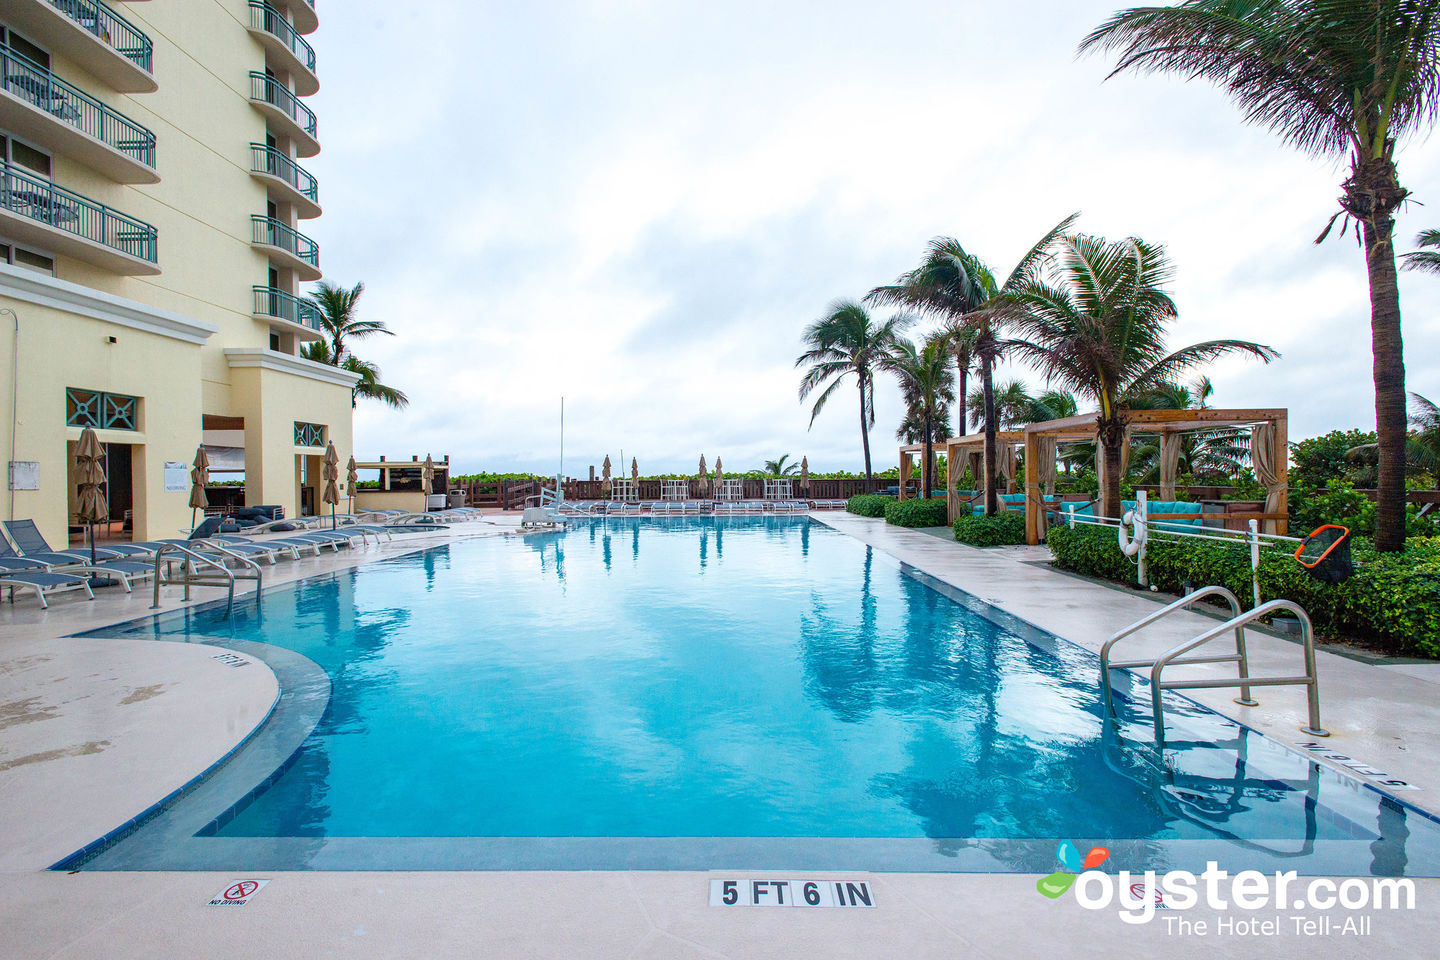 Hilton Singer Island Oceanfront/Palm Beaches Resort Review: What To REALLY  Expect If You Stay